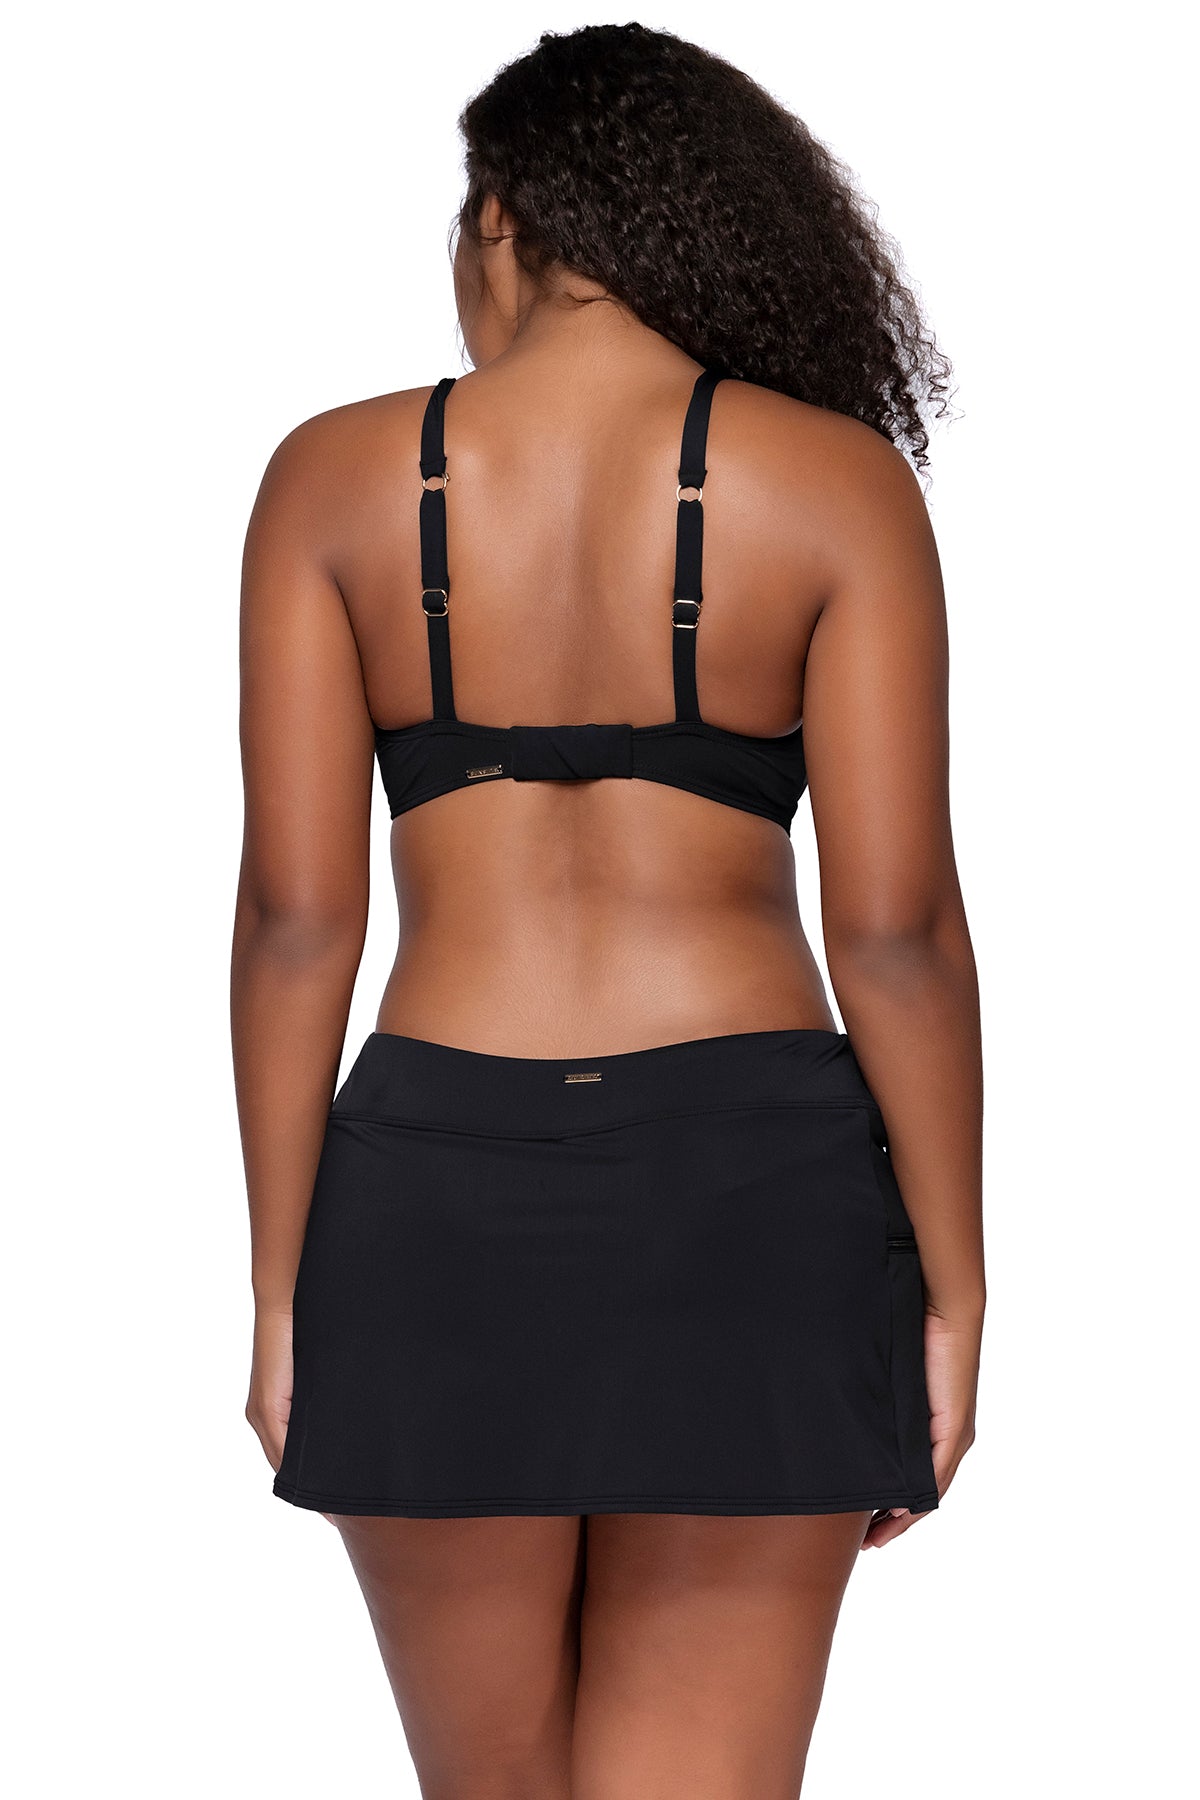 Back view of Sunsets Black Kauai Keyhole Top with Black Sporty Swim Skirt featuring additional model